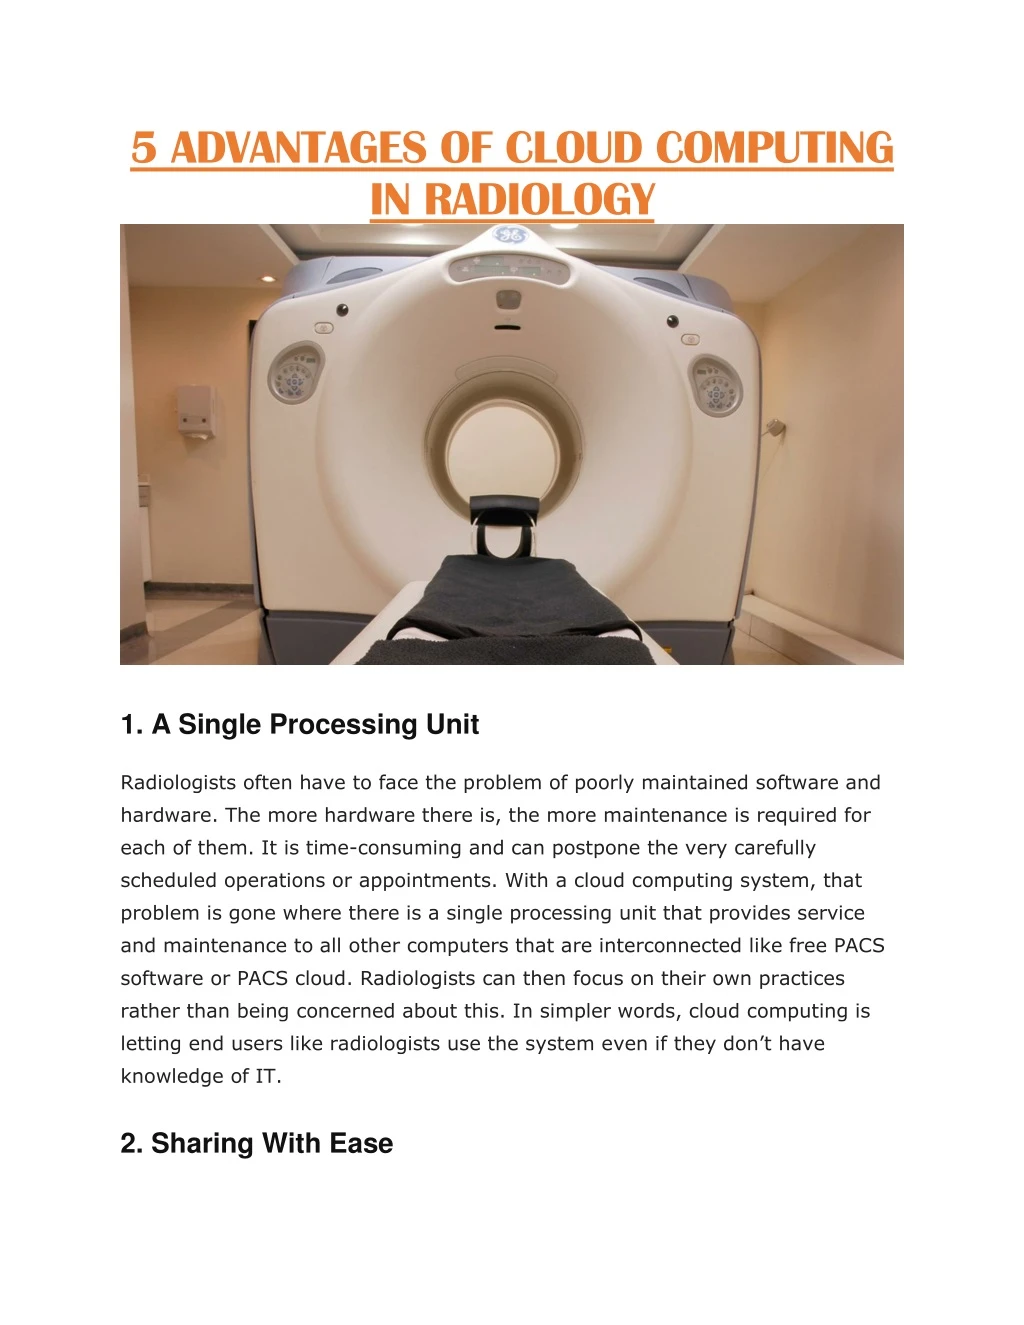 5 advantages of cloud computing in radiology